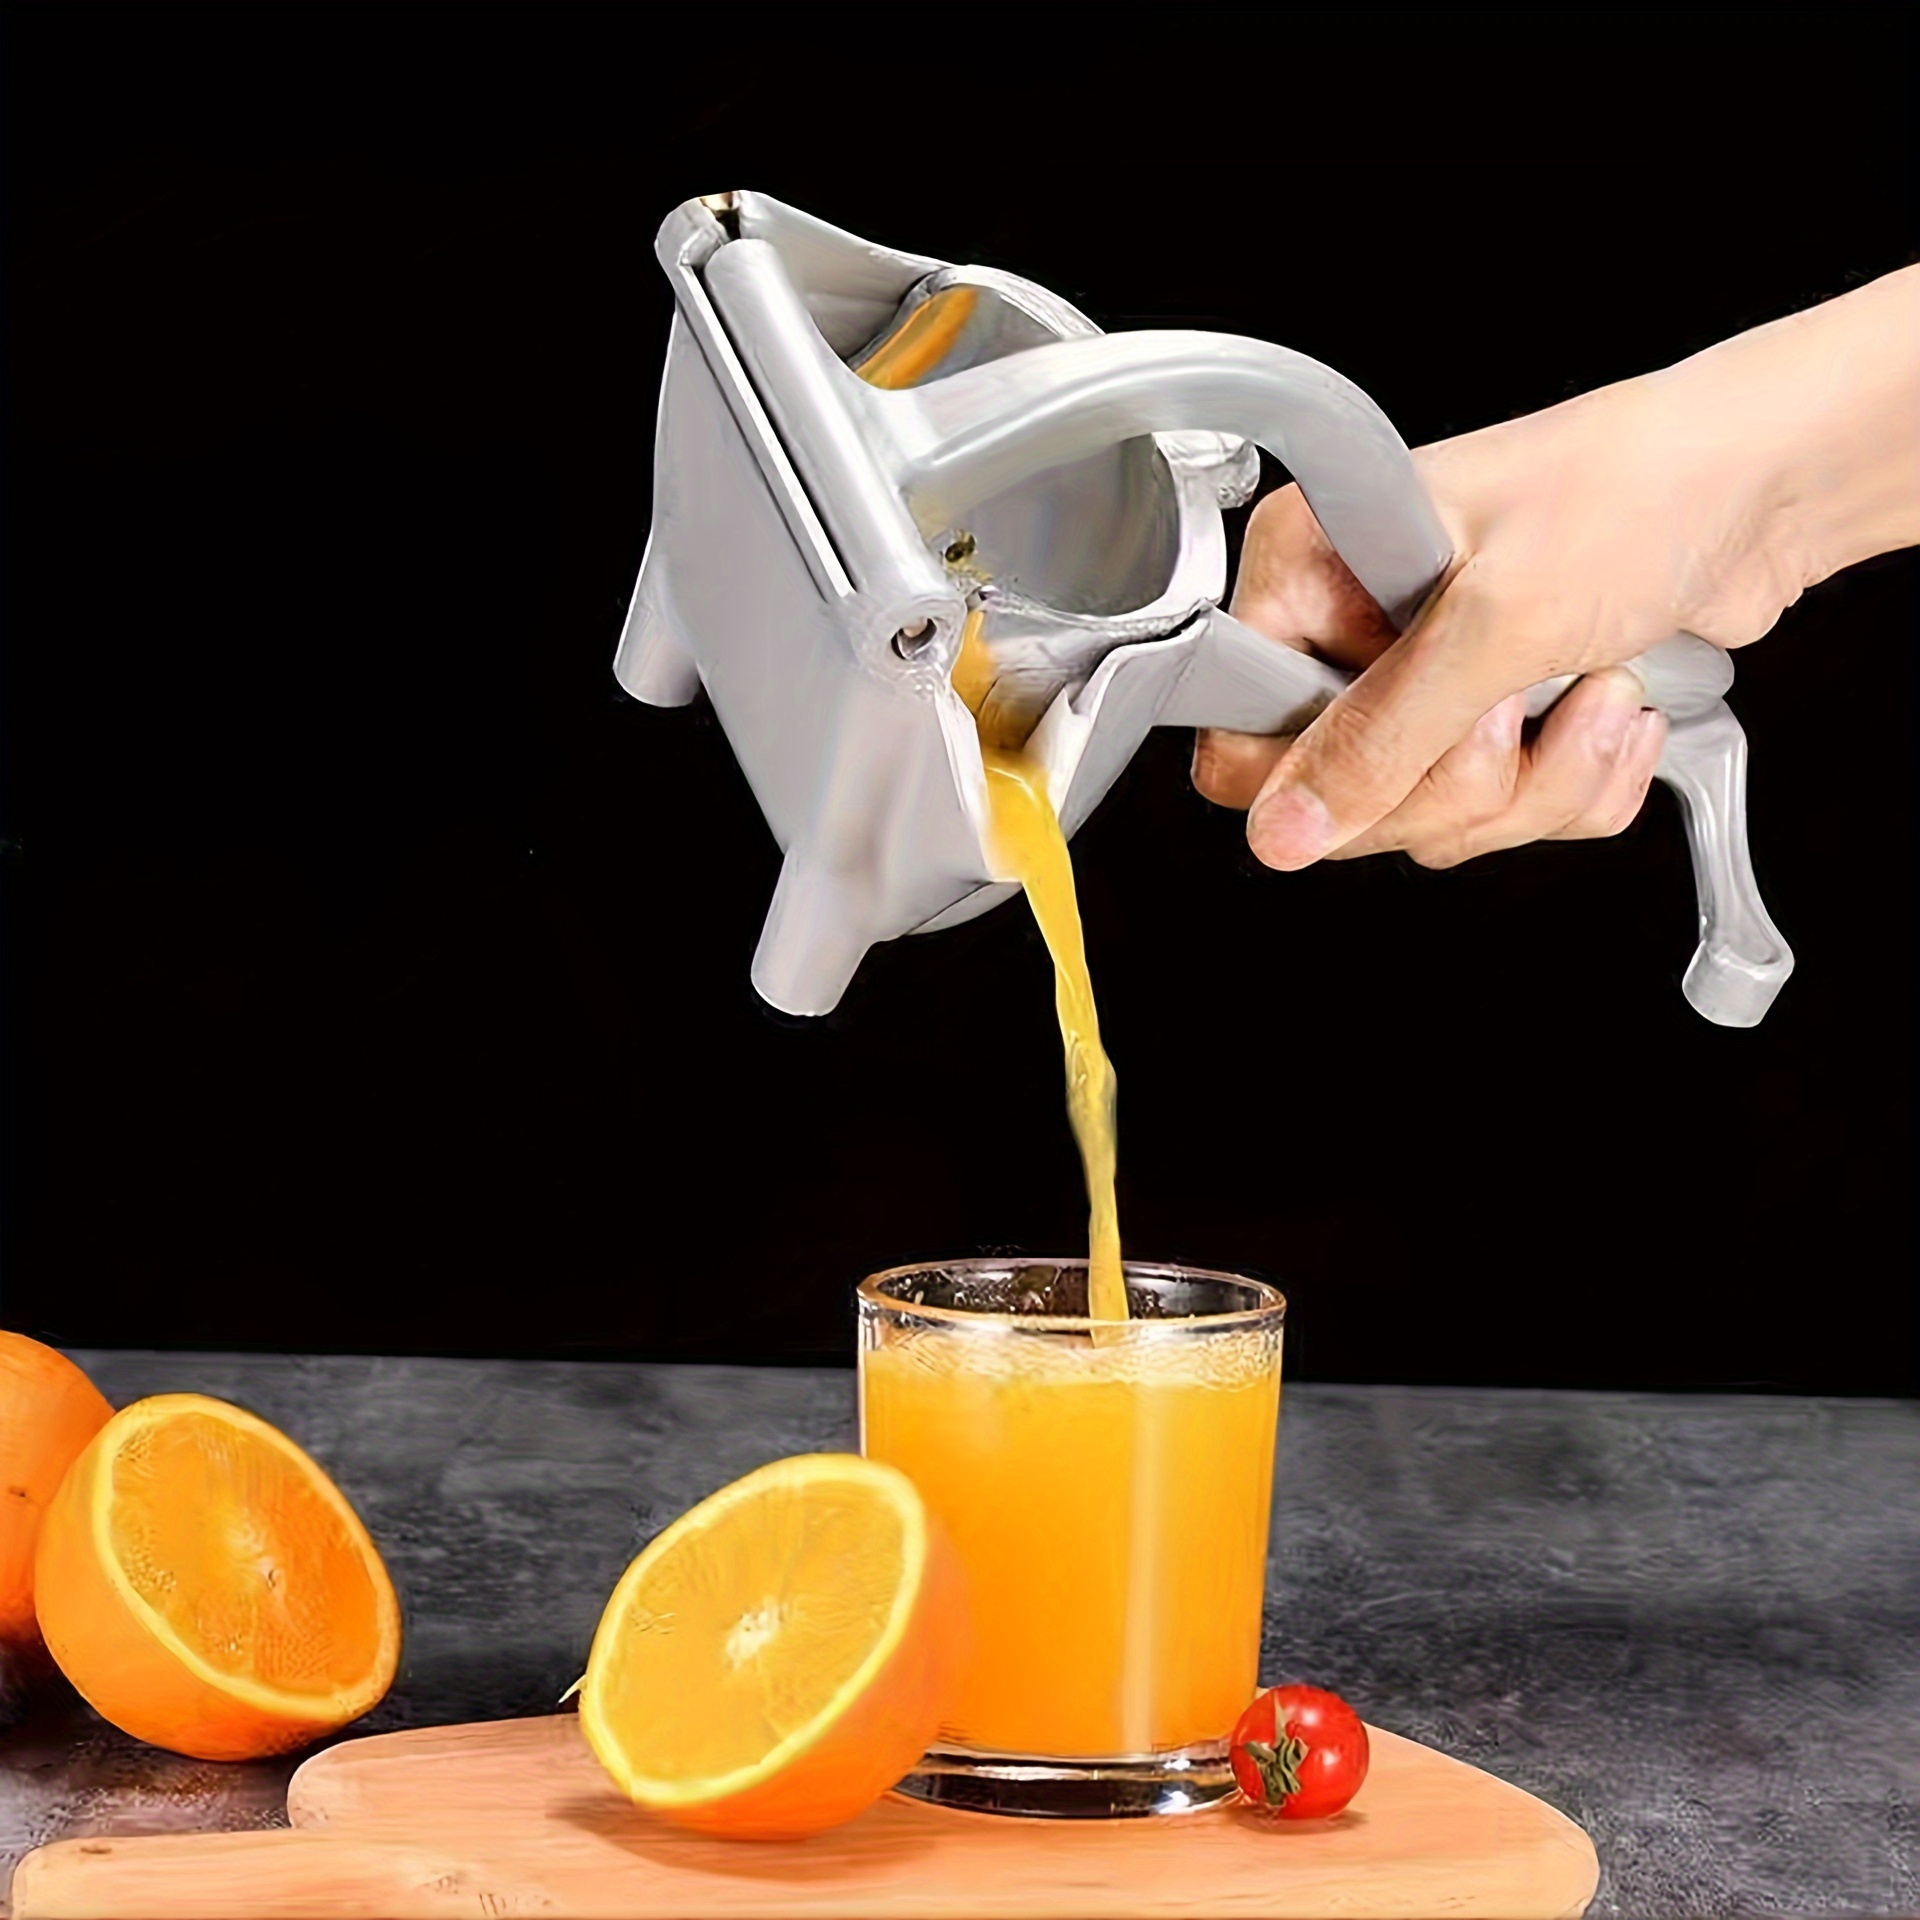 

Compact Manual Citrus Juicer - Stainless Steel Lemon & Orange Squeezer, Easy-to-use Fruit Press For Home Kitchen